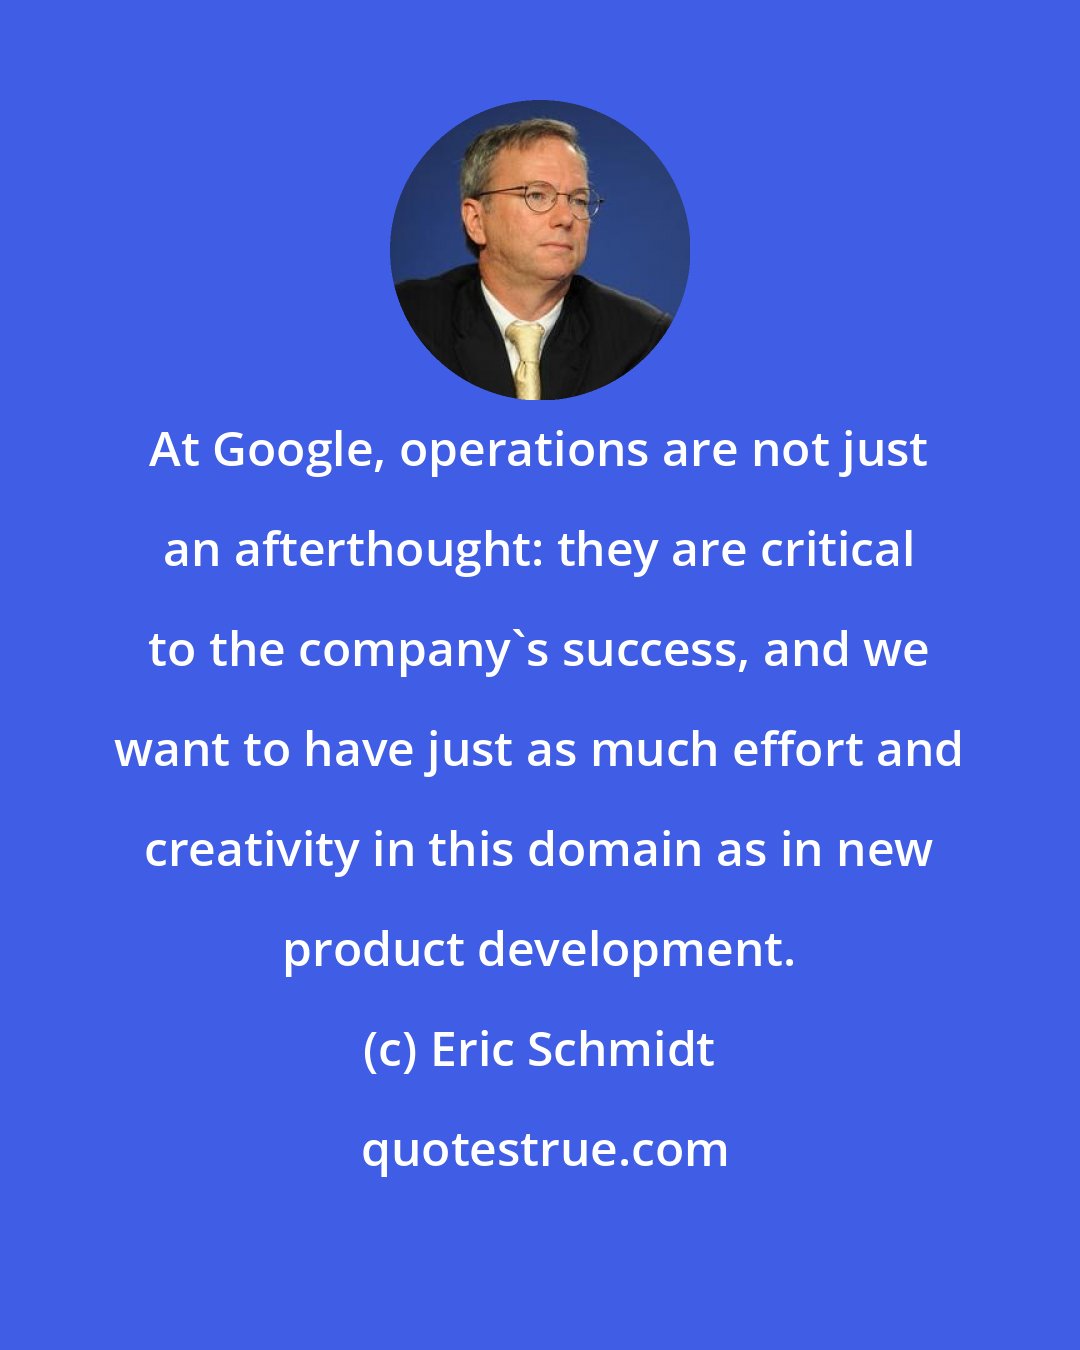 Eric Schmidt: At Google, operations are not just an afterthought: they are critical to the company's success, and we want to have just as much effort and creativity in this domain as in new product development.